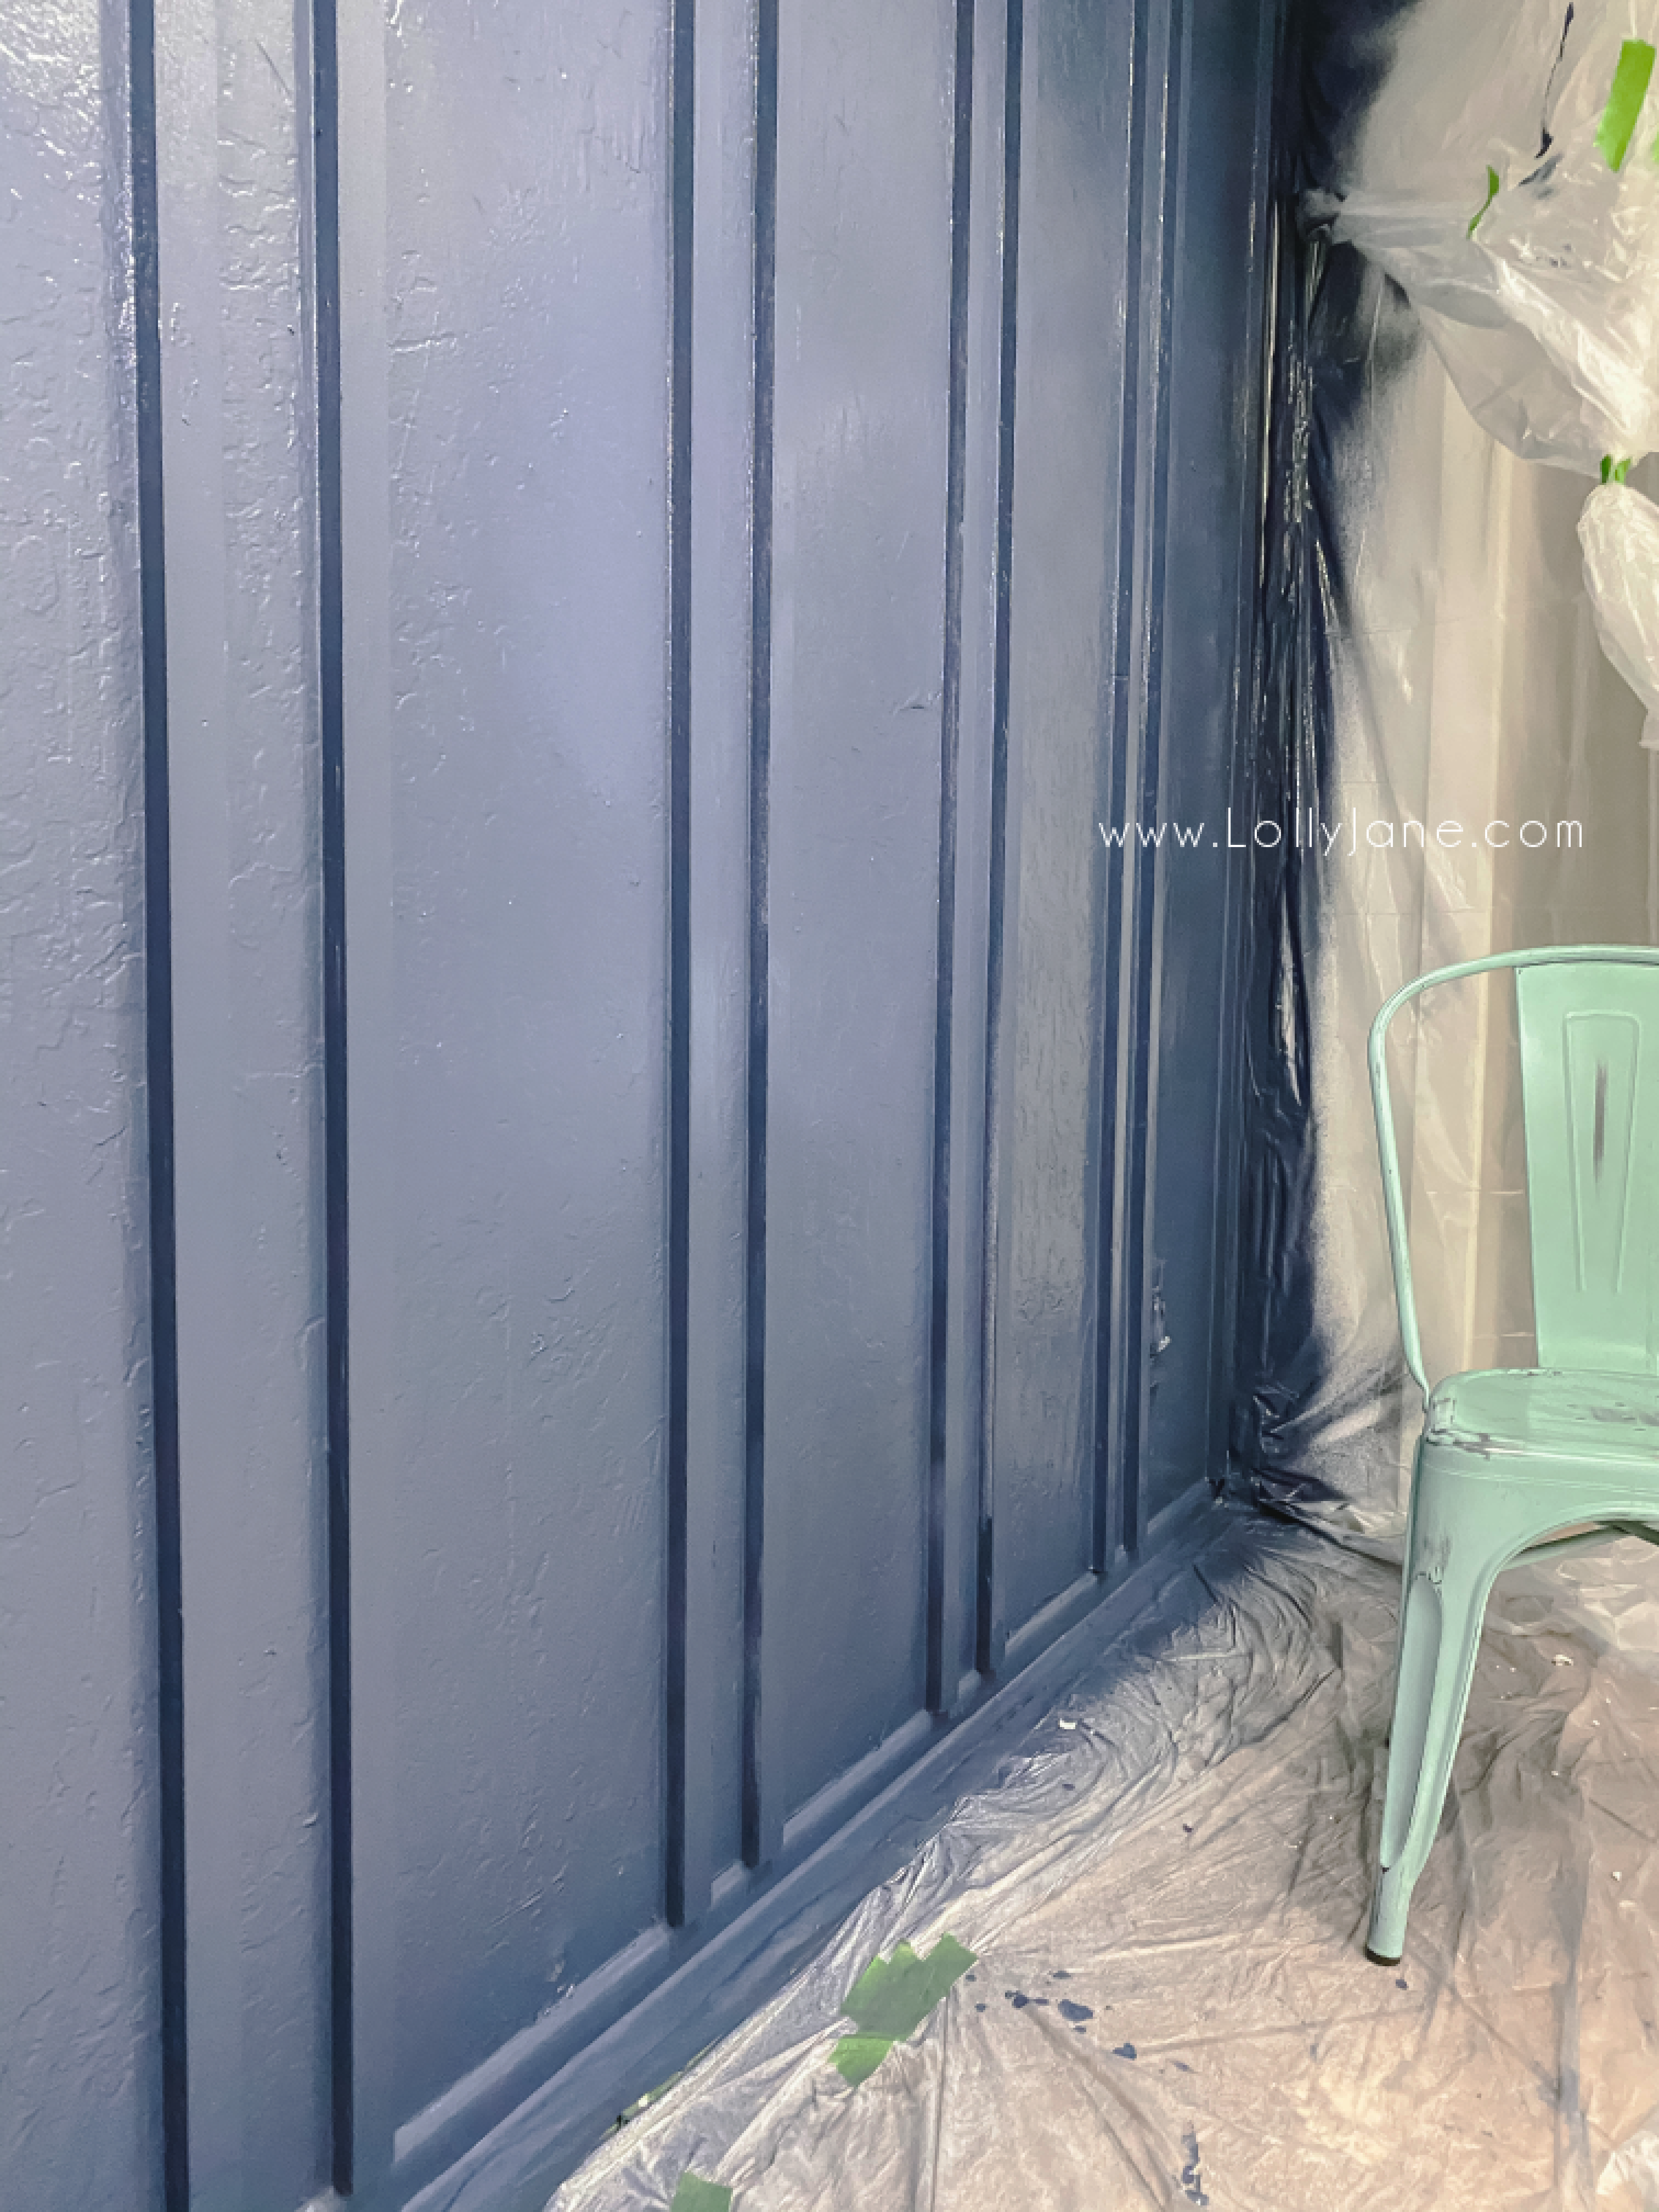 Such a fun navy blue double batten wall treatment! Such a sophisticated way to dress up your dining room wall, a boho farmhouse style favorite! #bohochic #bohofarmhouse #bohostyledecor #doublebattenwalltreatment #diydoublebatten #navybluewalldecor